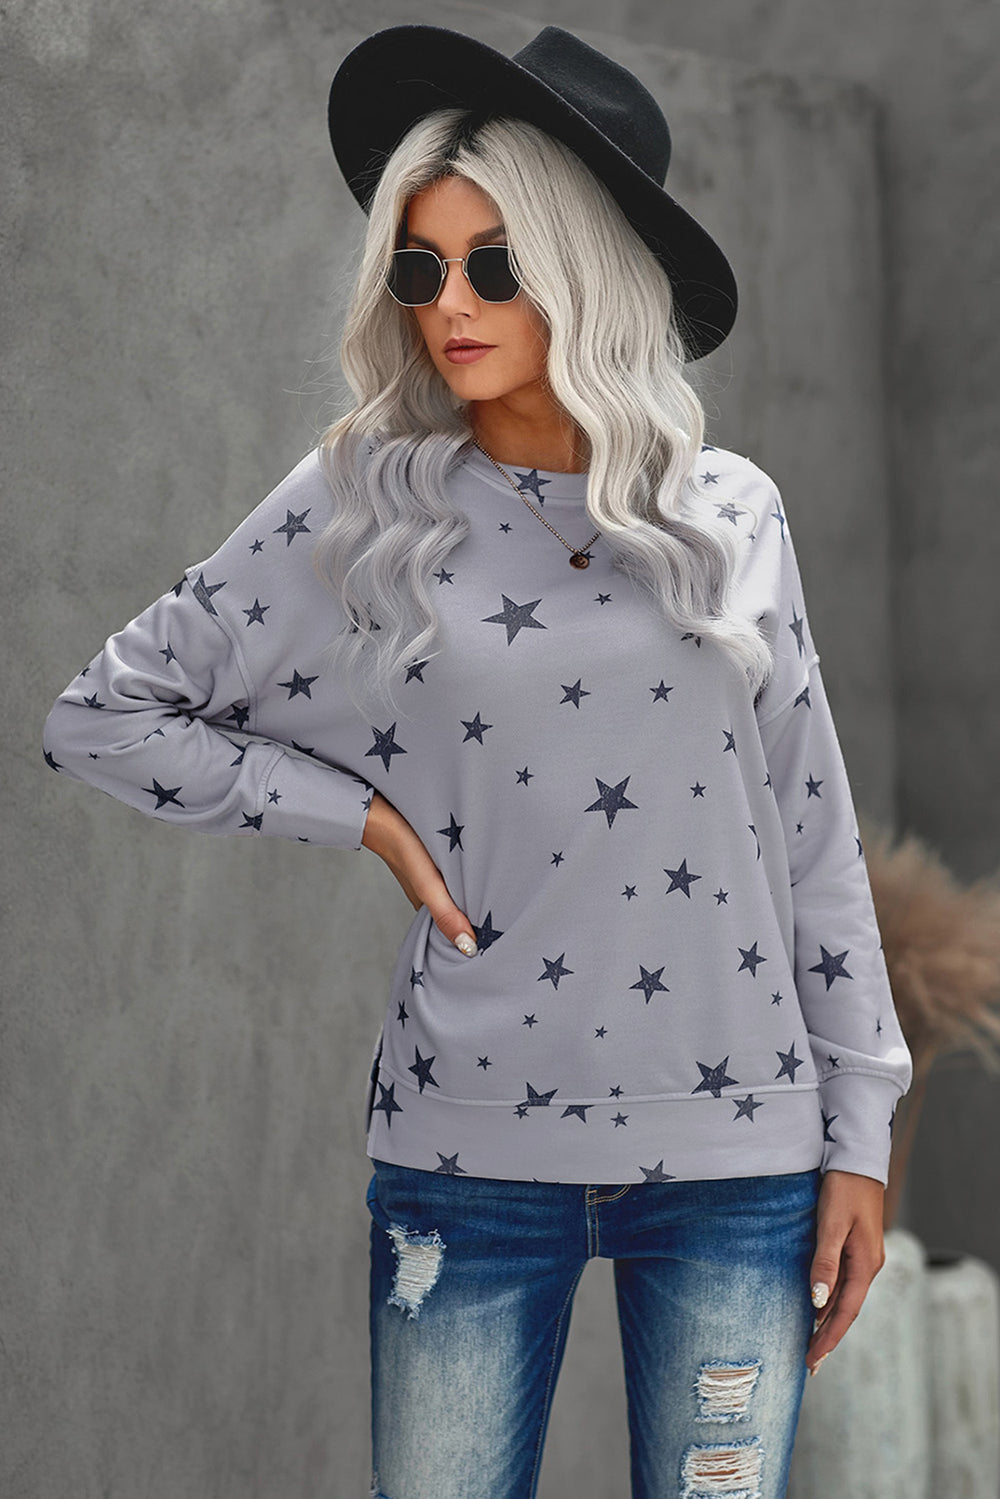 Women's Gray Round Neck Star Print Casual Long Sleeve Top